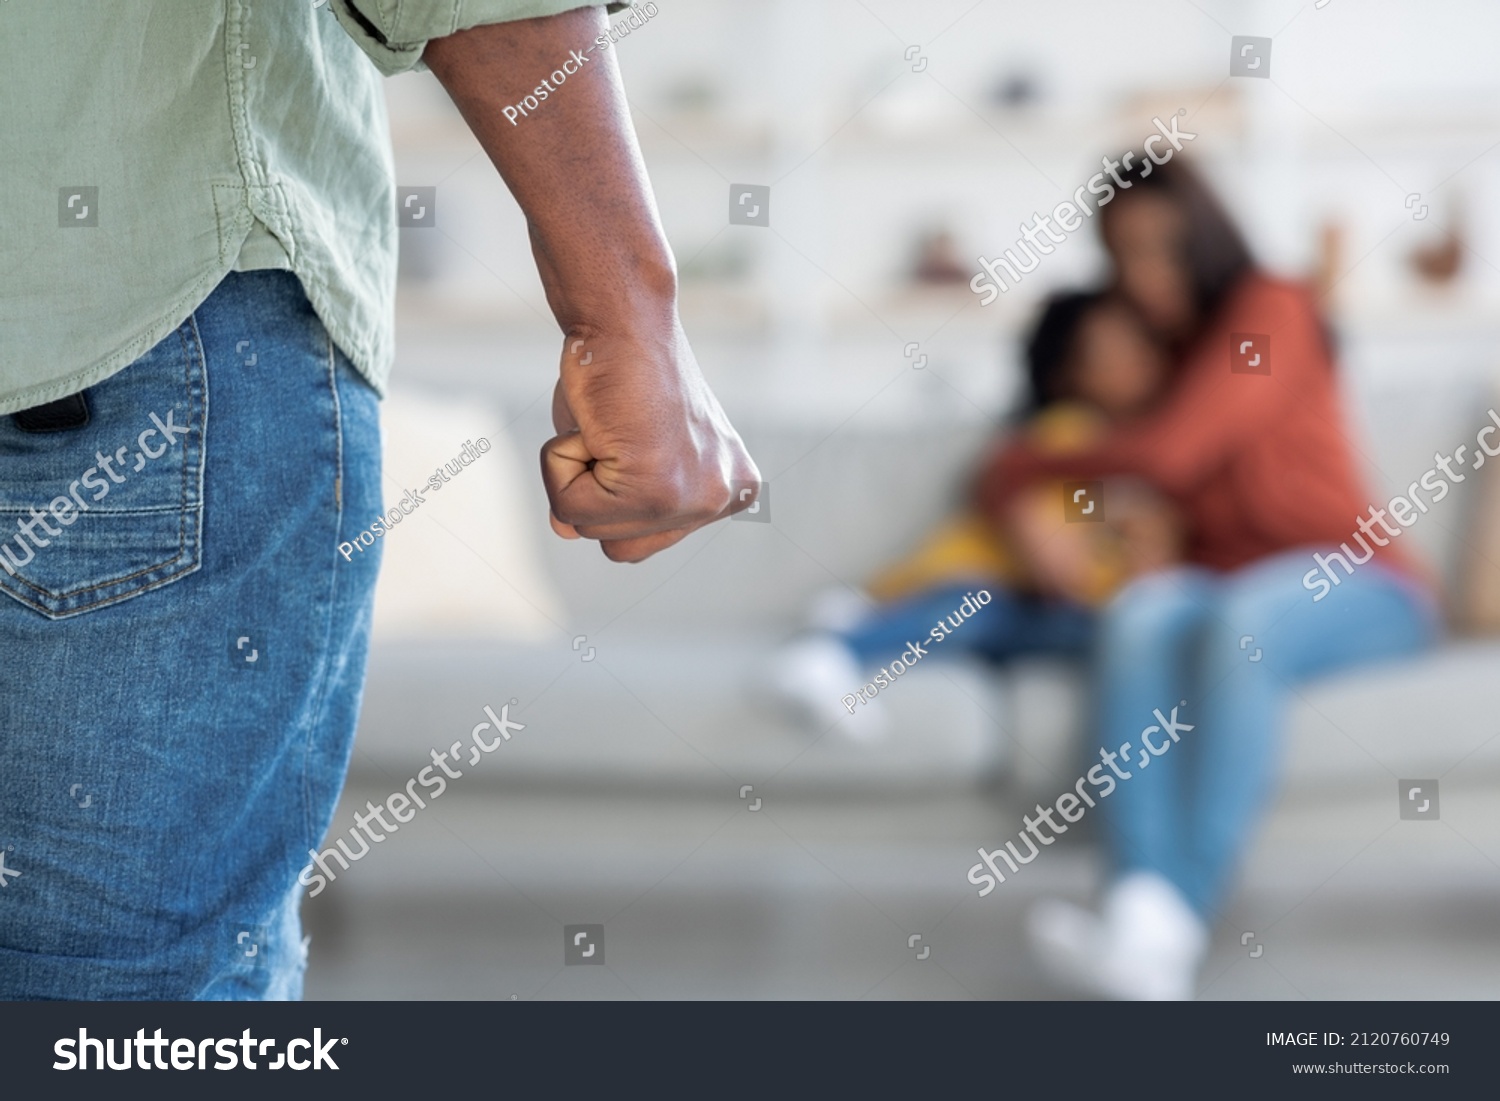 Domestic Violence. Unrecognizable African American Man Threatening Wife And Daughter With His Fist, Scared Mother Embracing Little Girl While Sitting Together On Couch, Selective Focus On Male Hand #2120760749